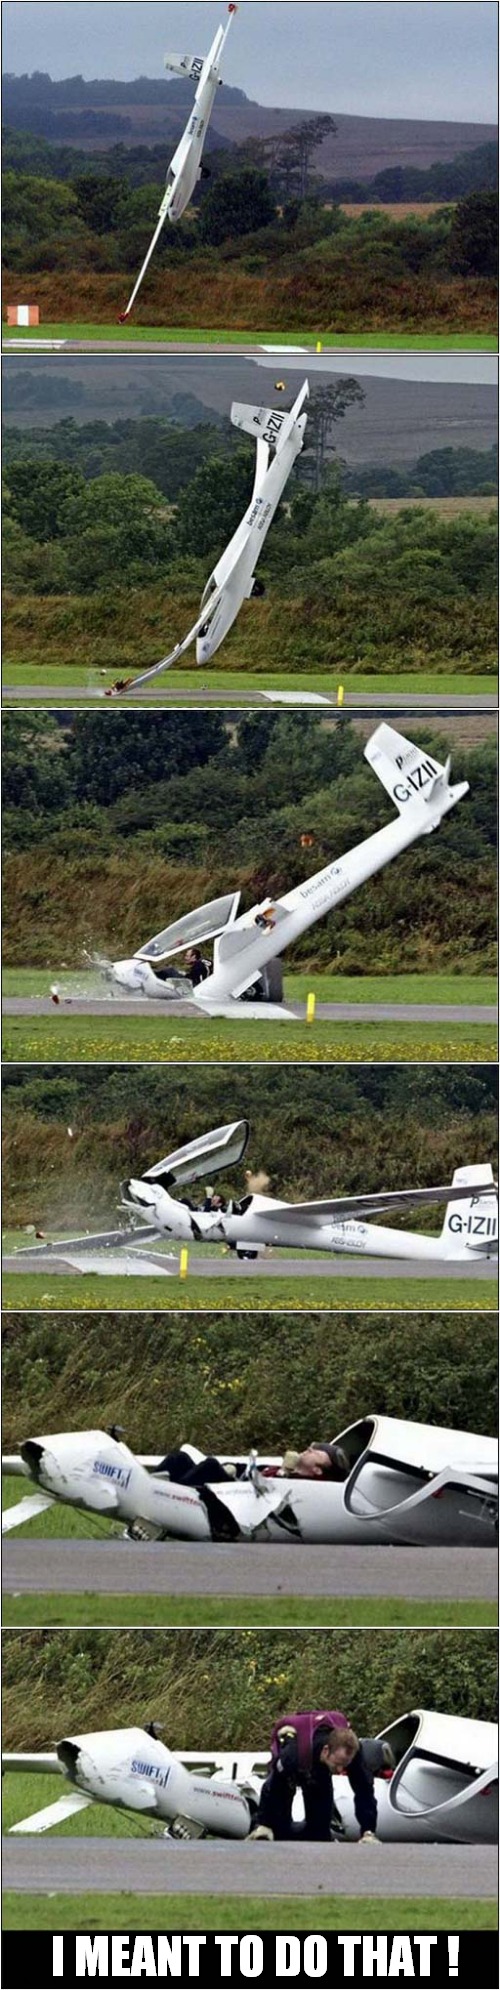 How To Land A Glider ! | I MEANT TO DO THAT ! | image tagged in plane crash,glider,i meant to do that,dark humour | made w/ Imgflip meme maker